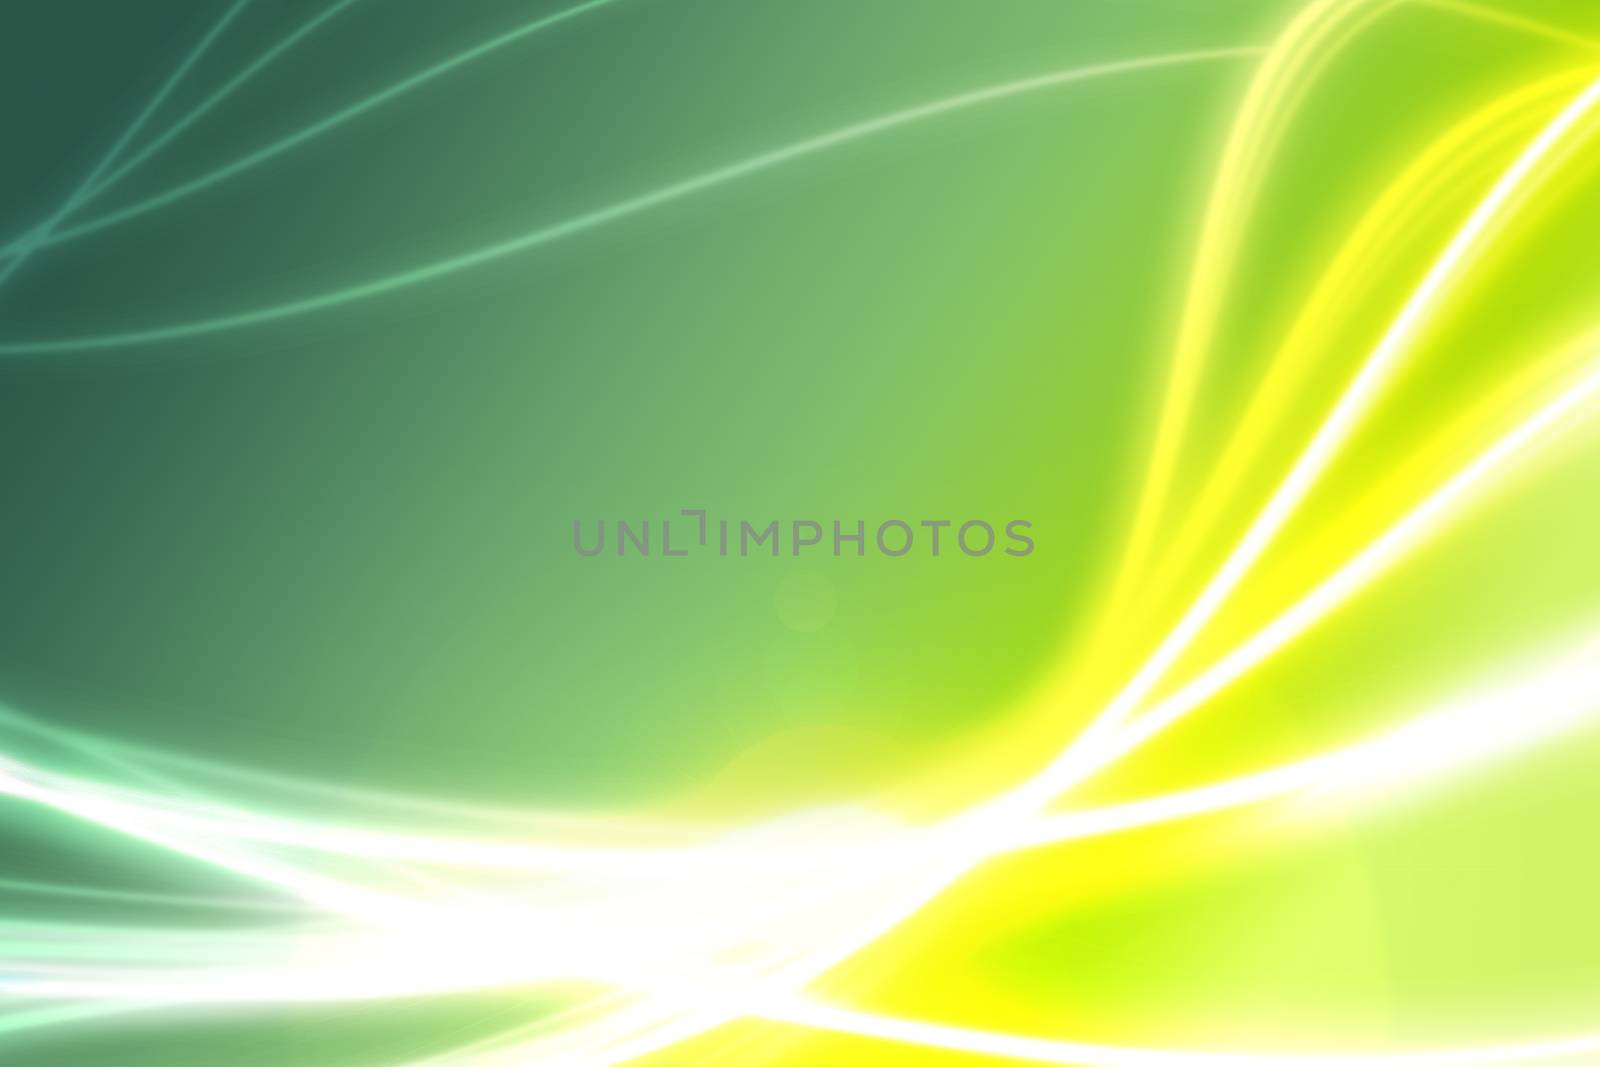 Light Lines - Abstract Green Background with Glowing Lines